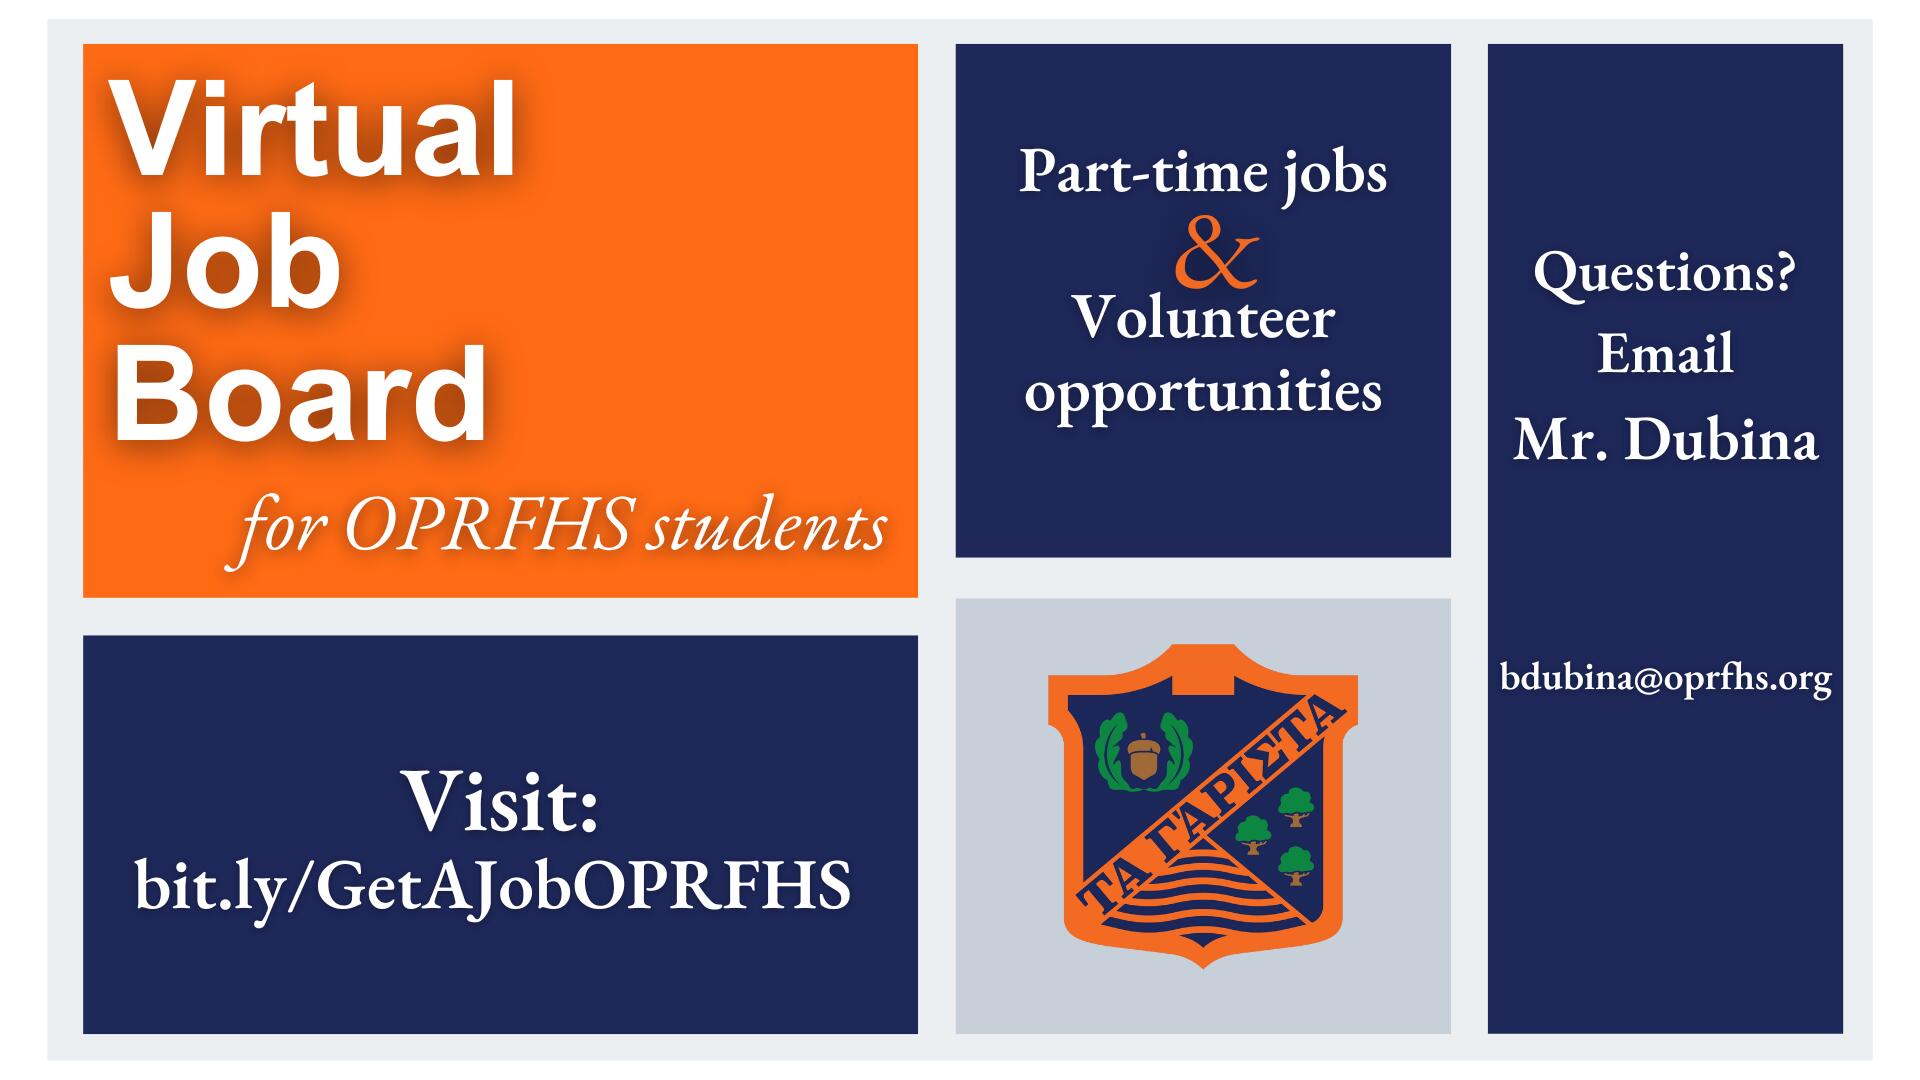 Part-time job opportunities for students